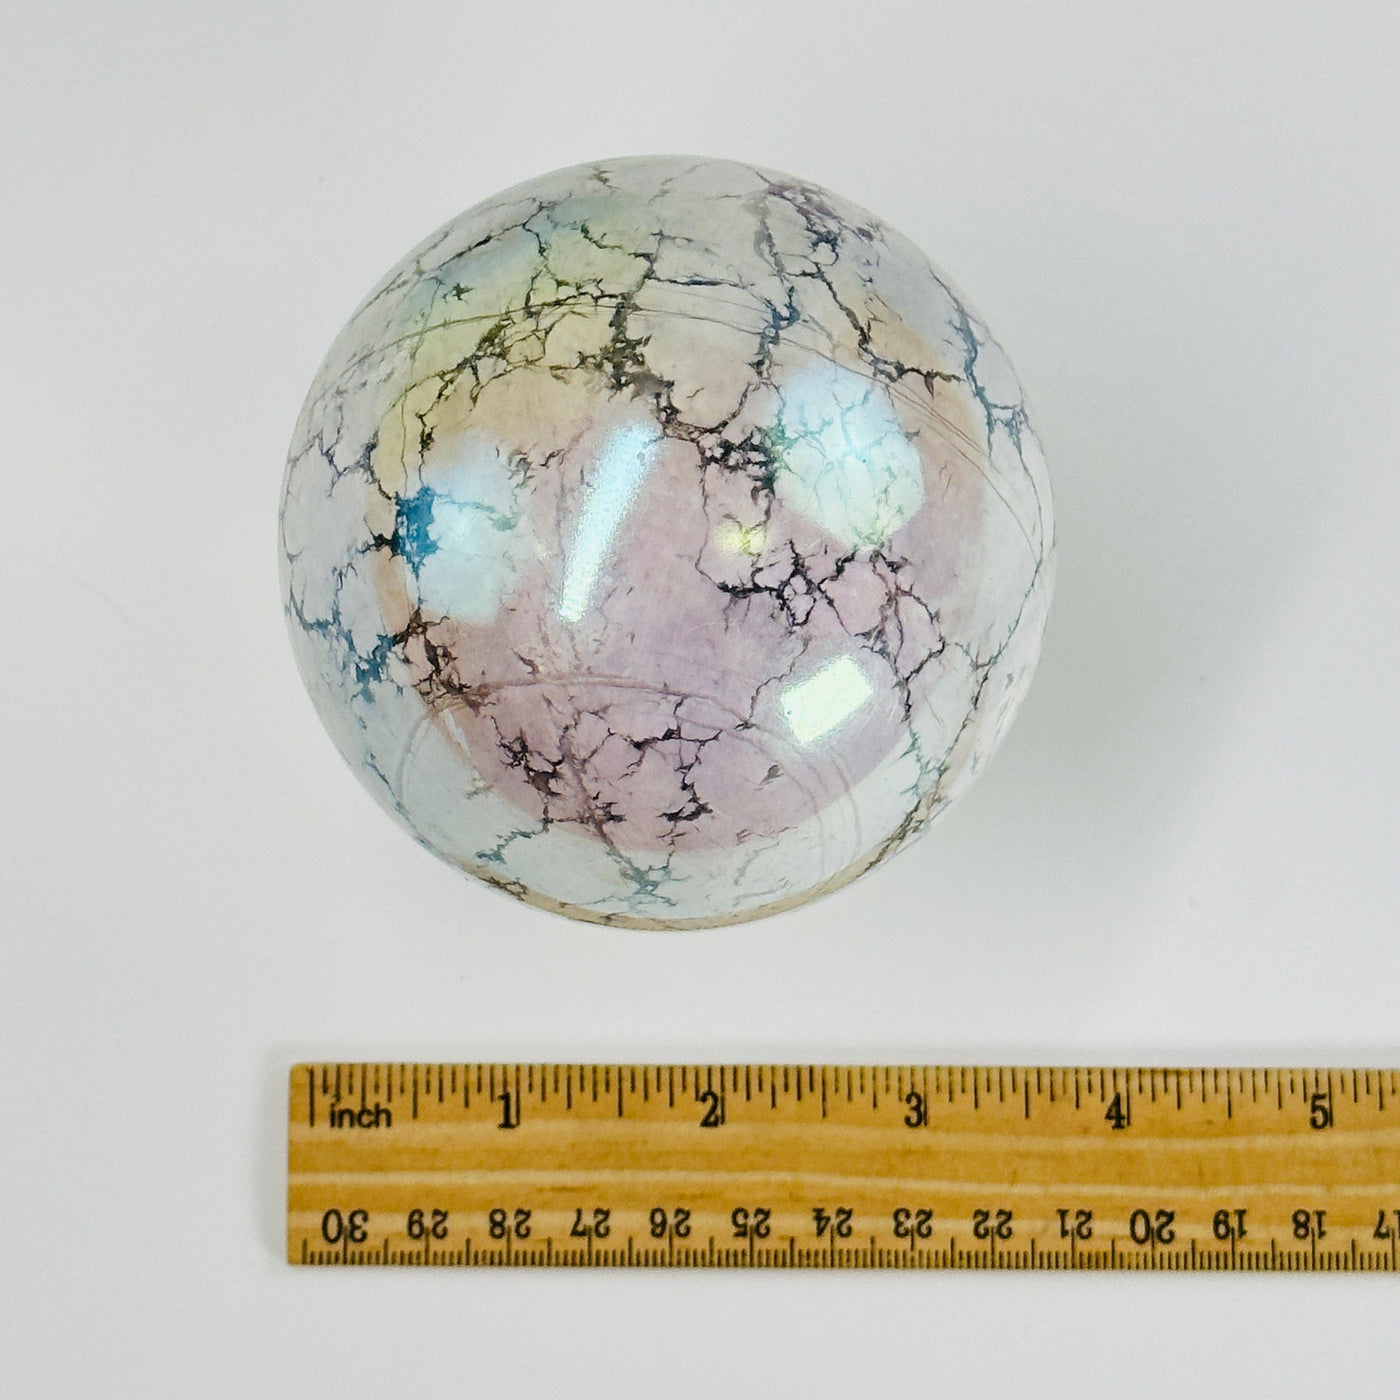 aura howlite sphere next to a ruler for size reference